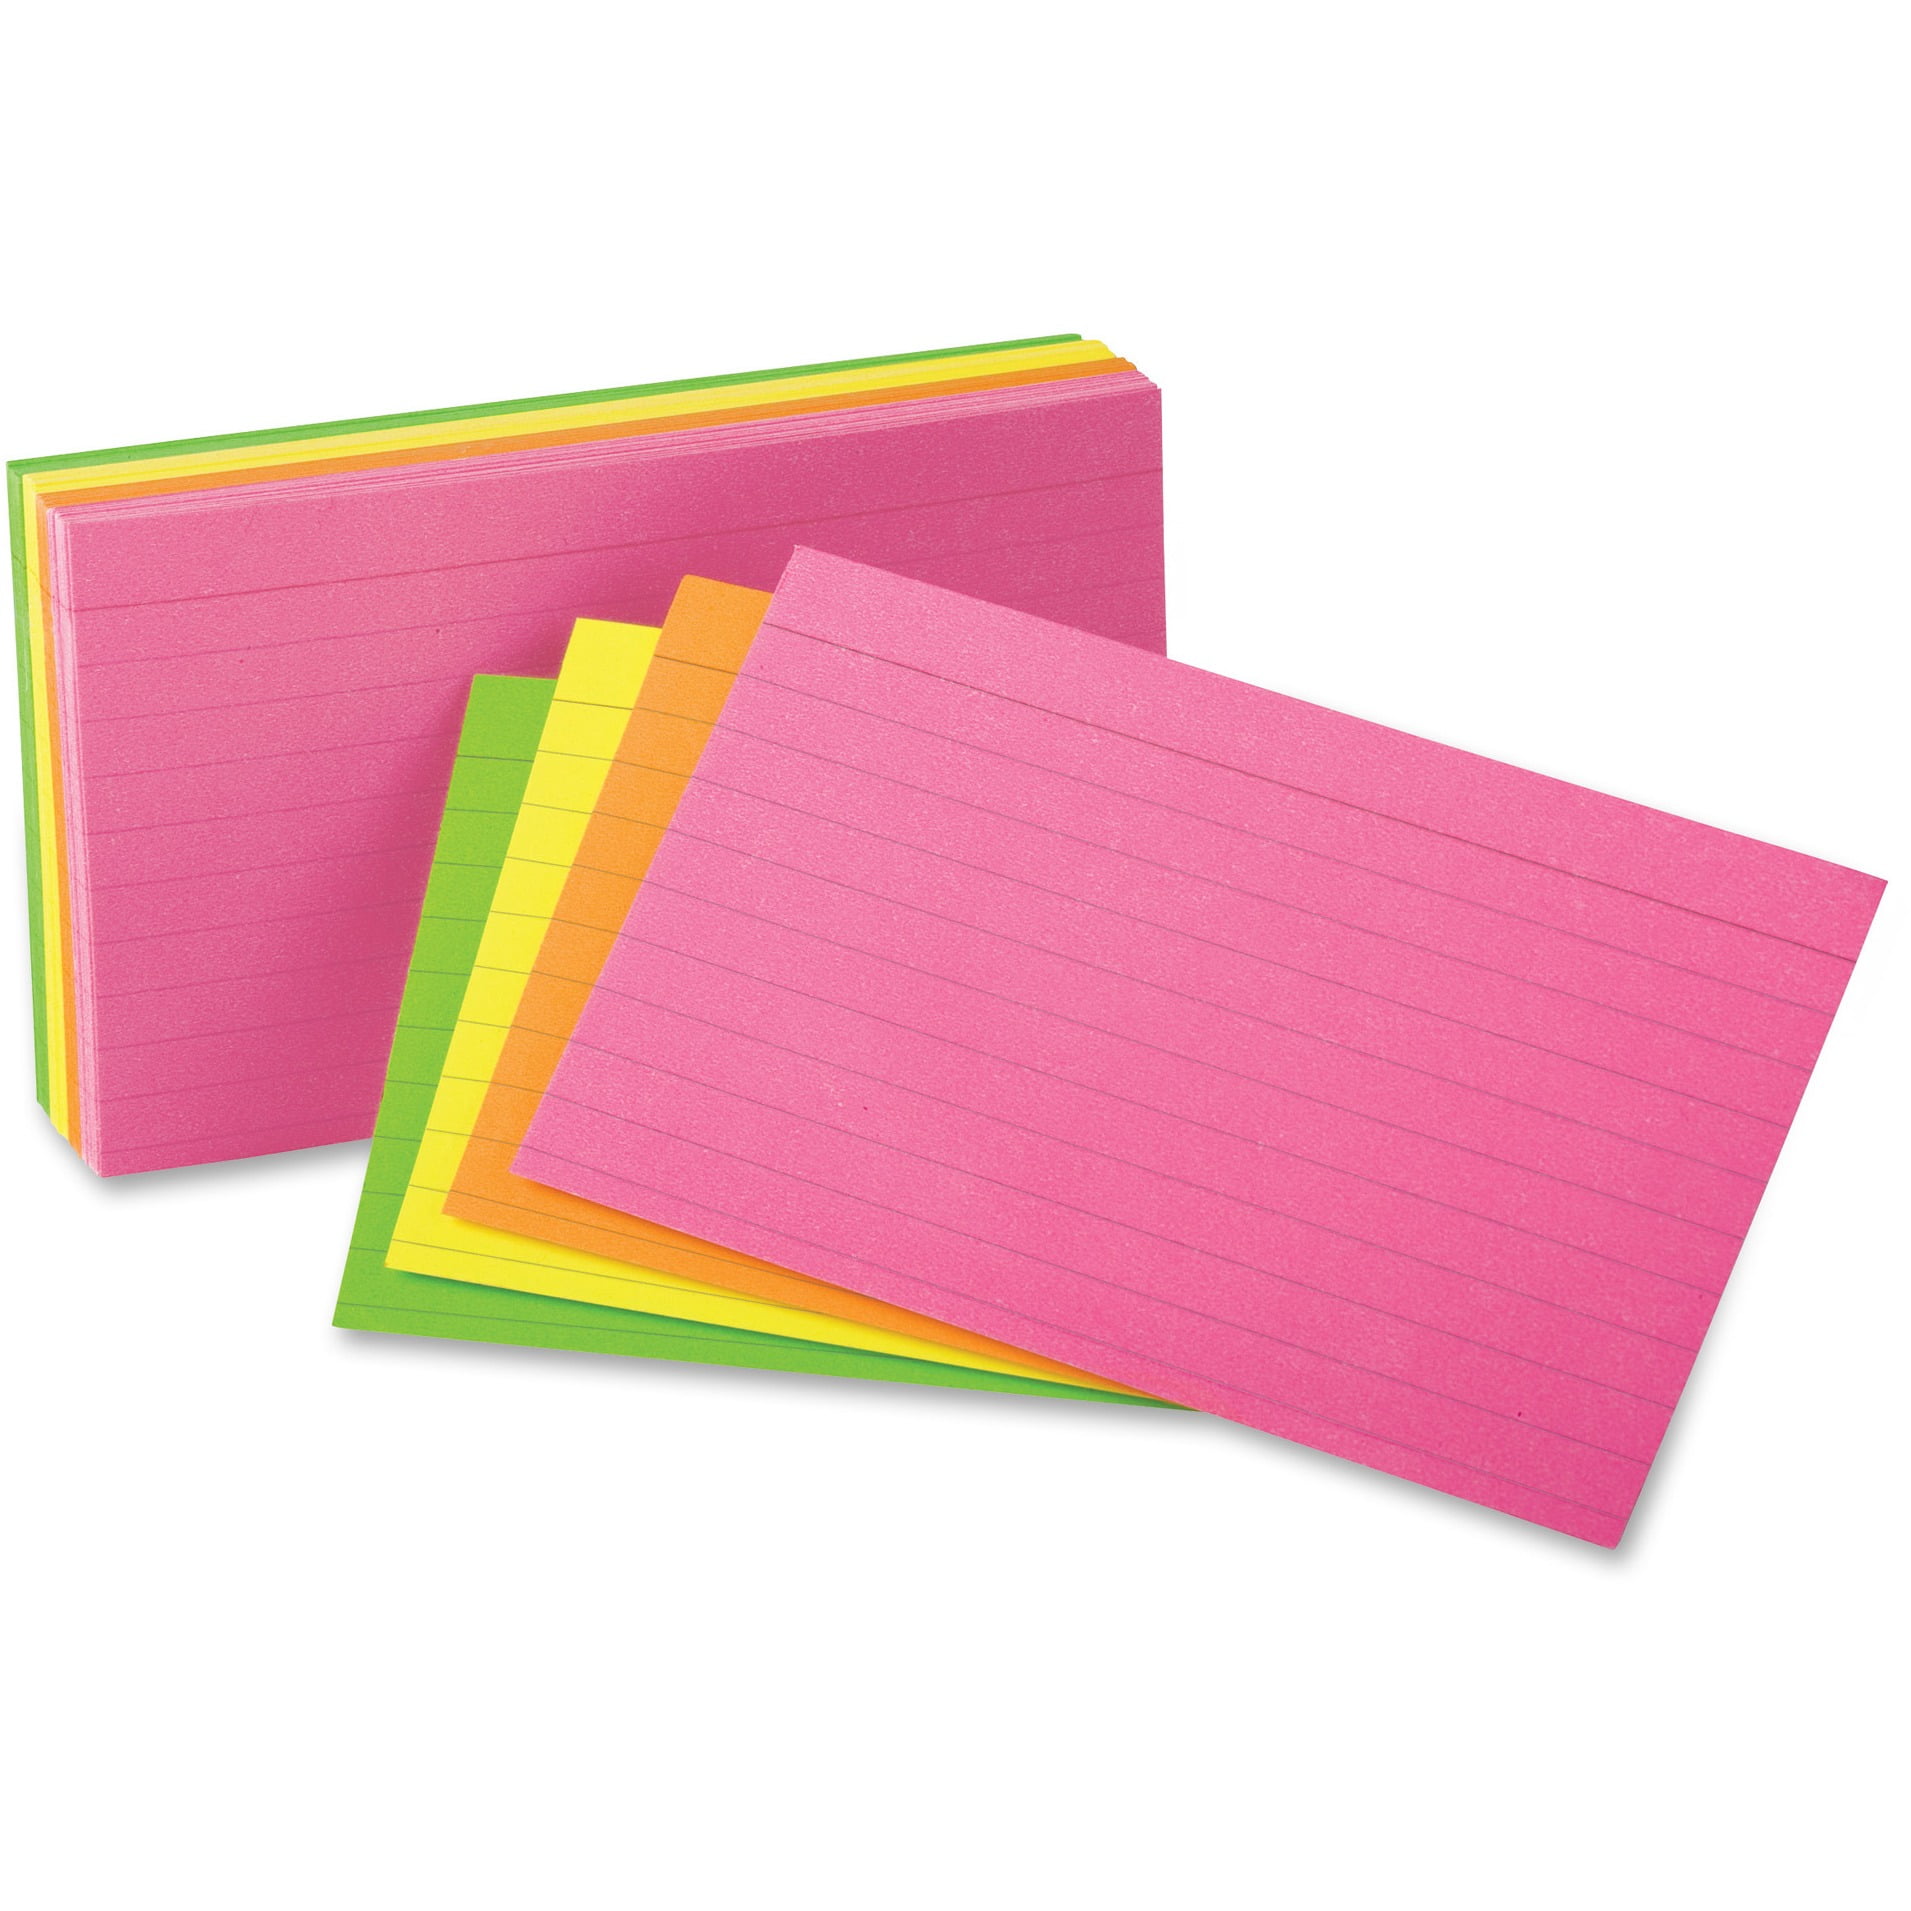 NEON STARS & FLASHES CARDS FOR PRICING CRAFT ASSORTED COLOURS & SIZES 50 PACK 